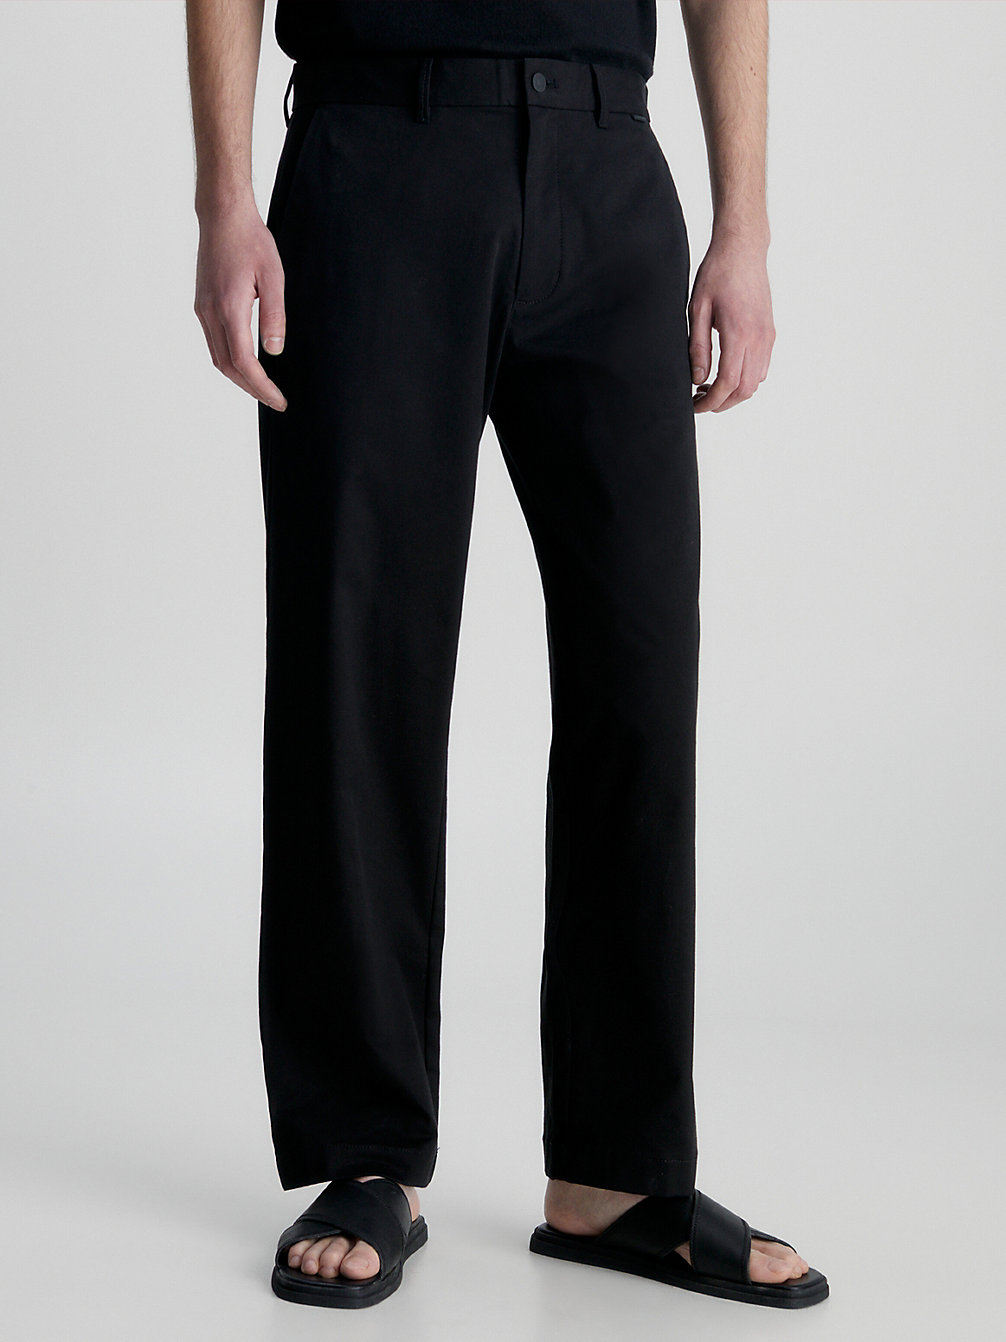 CK BLACK Relaxed Twill Trousers undefined men Calvin Klein